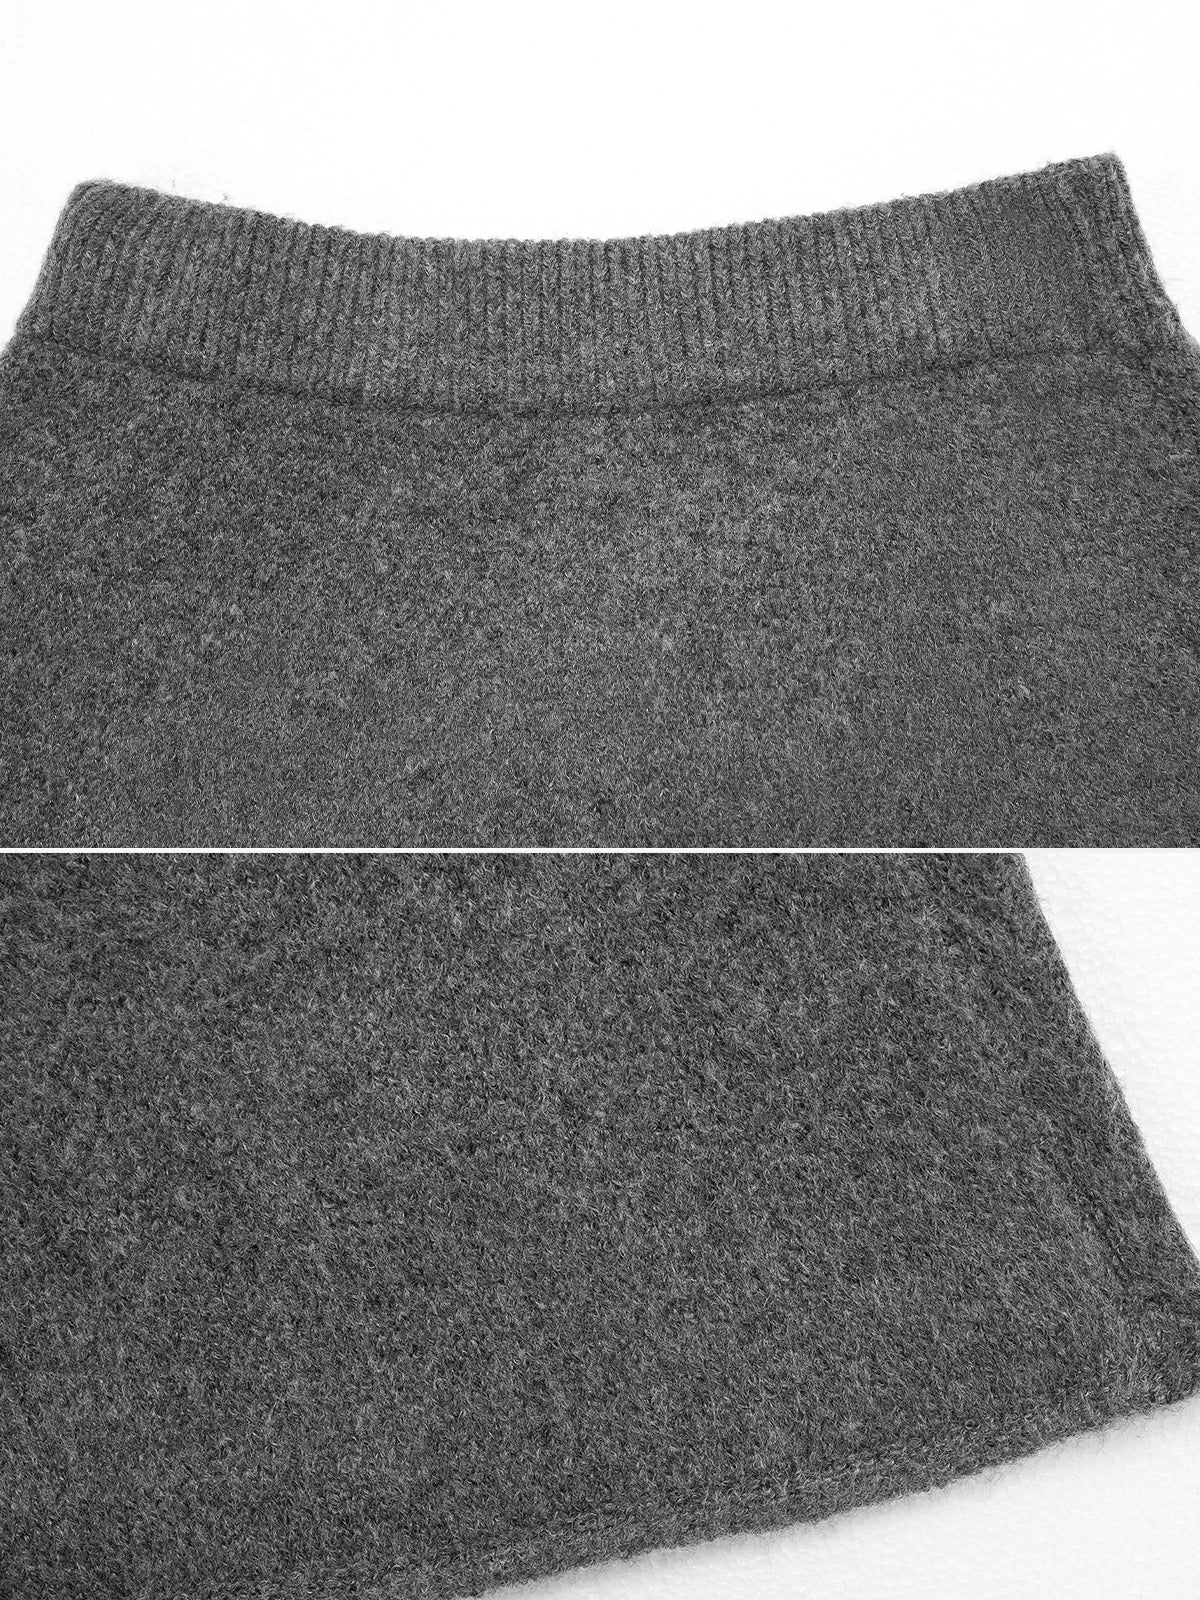 Elevate your leisure attire with this casual A-line skirt, adorned with an elastic high-waist and soft knitted texture.